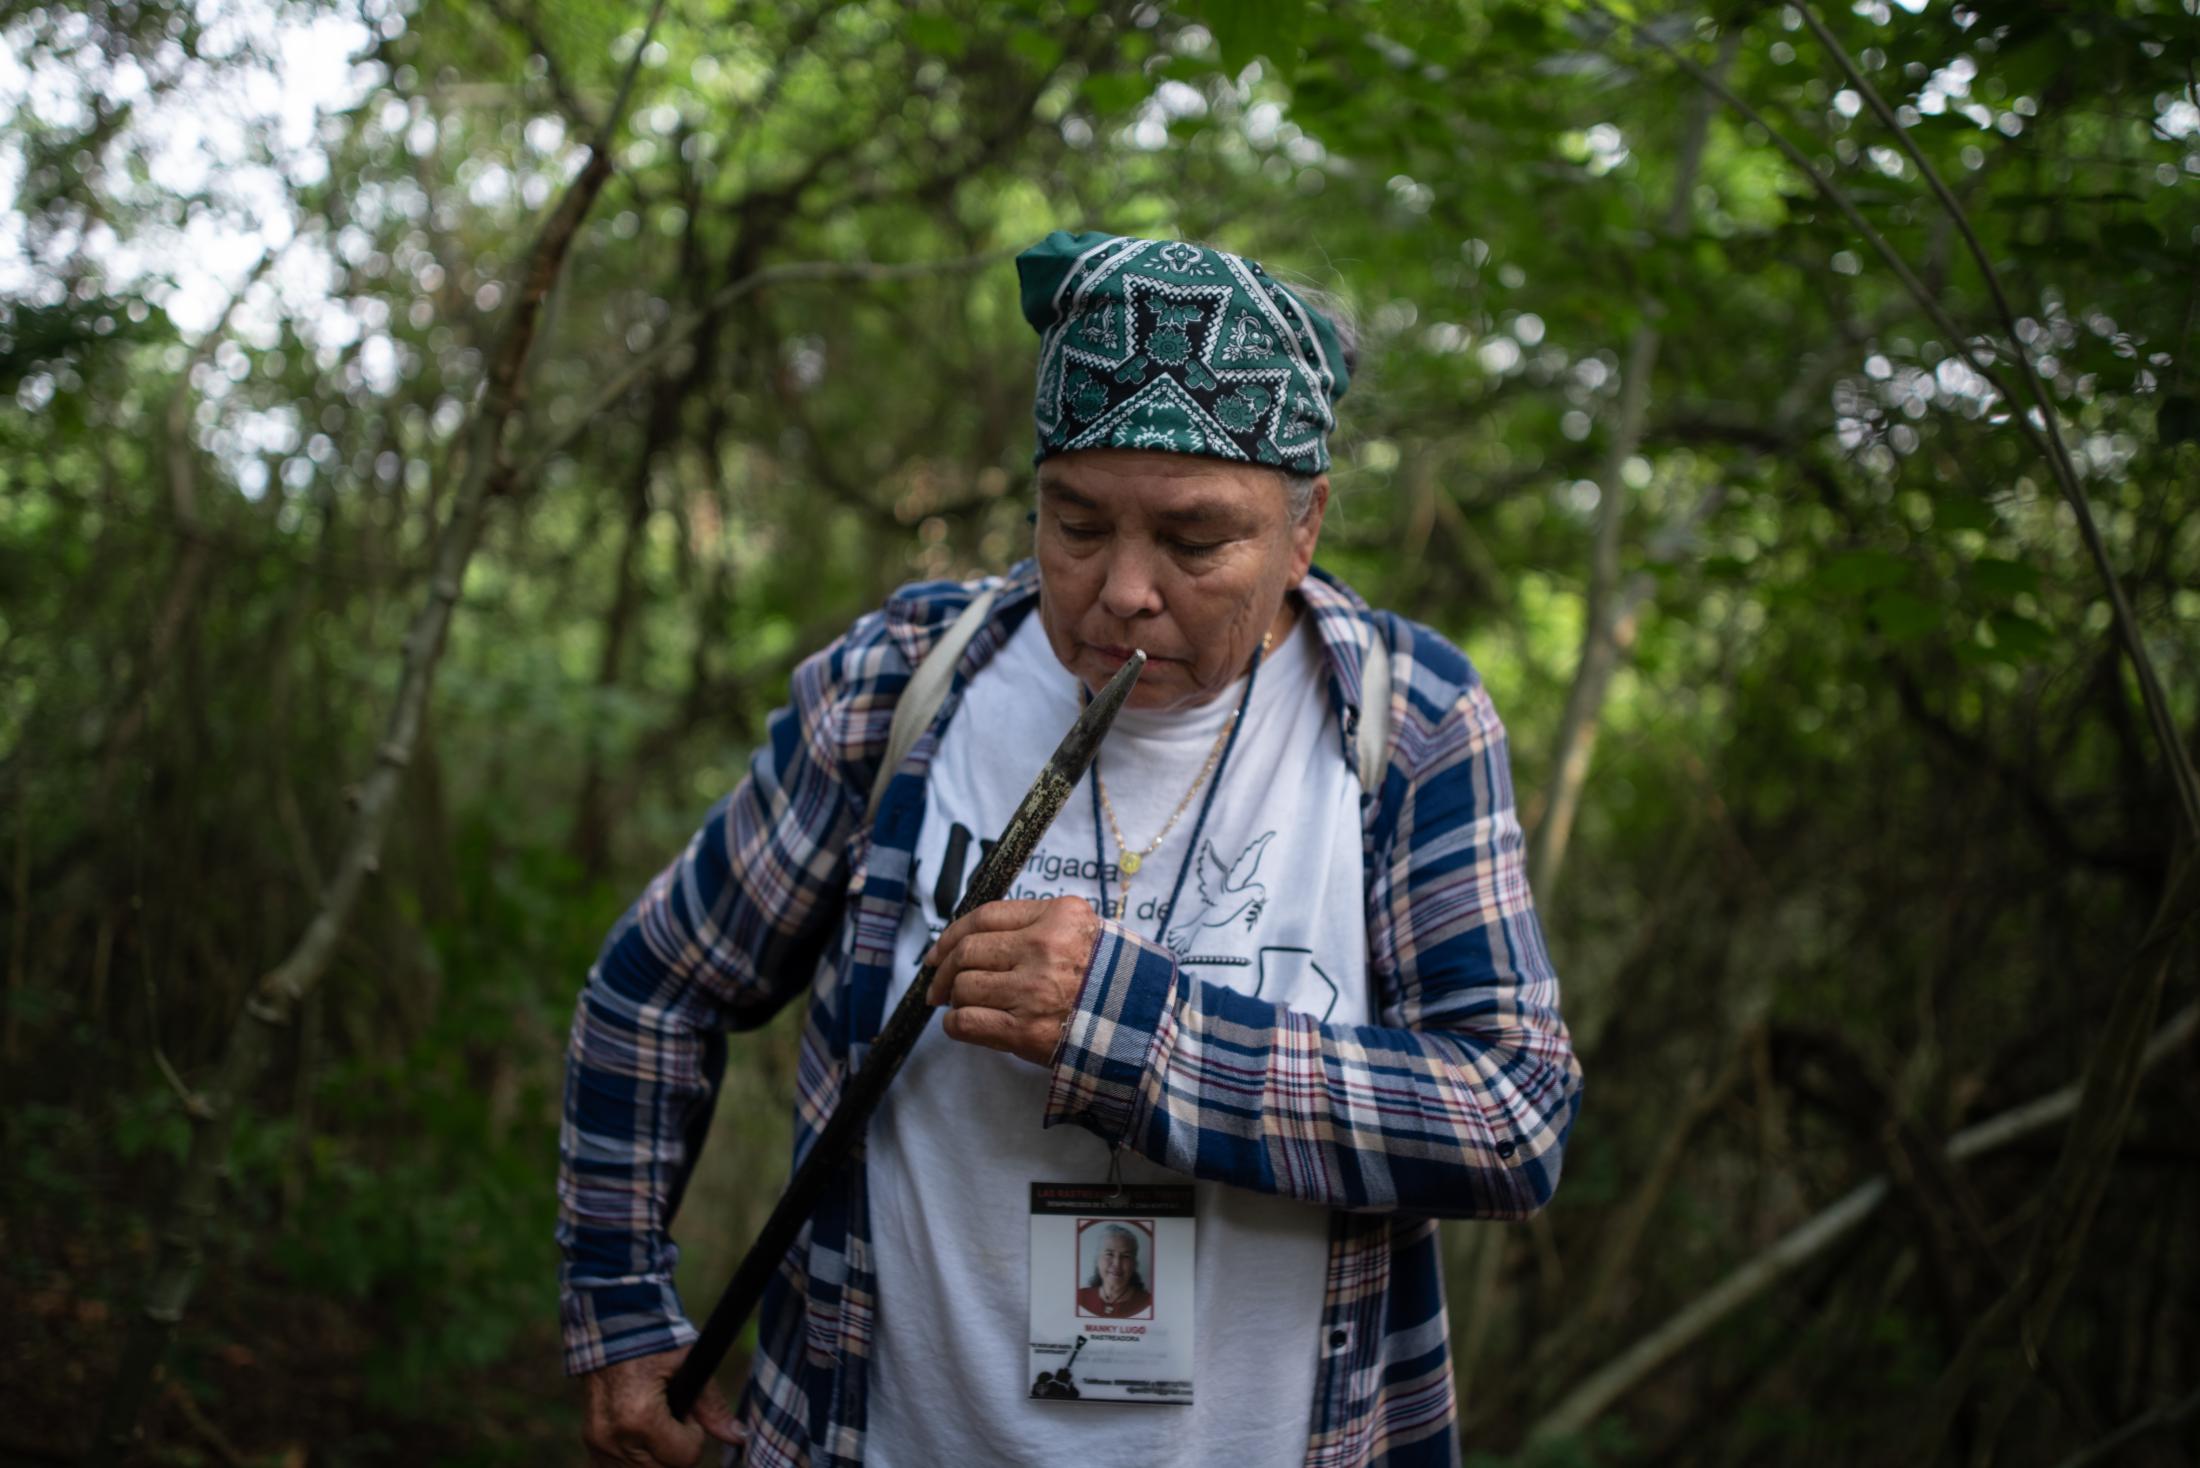 Manky Lugo, 64, seeker for missing persons of Sinaloa, Mexico, smells a metallic tool that buried in the earth in field that is investigated by police authorities and family groups participating in the fifth National Missing Persons Search Brigade in Tihuatlan, Veracruz, Mexico, on February 20, 2020. Victoria Razo for NPR